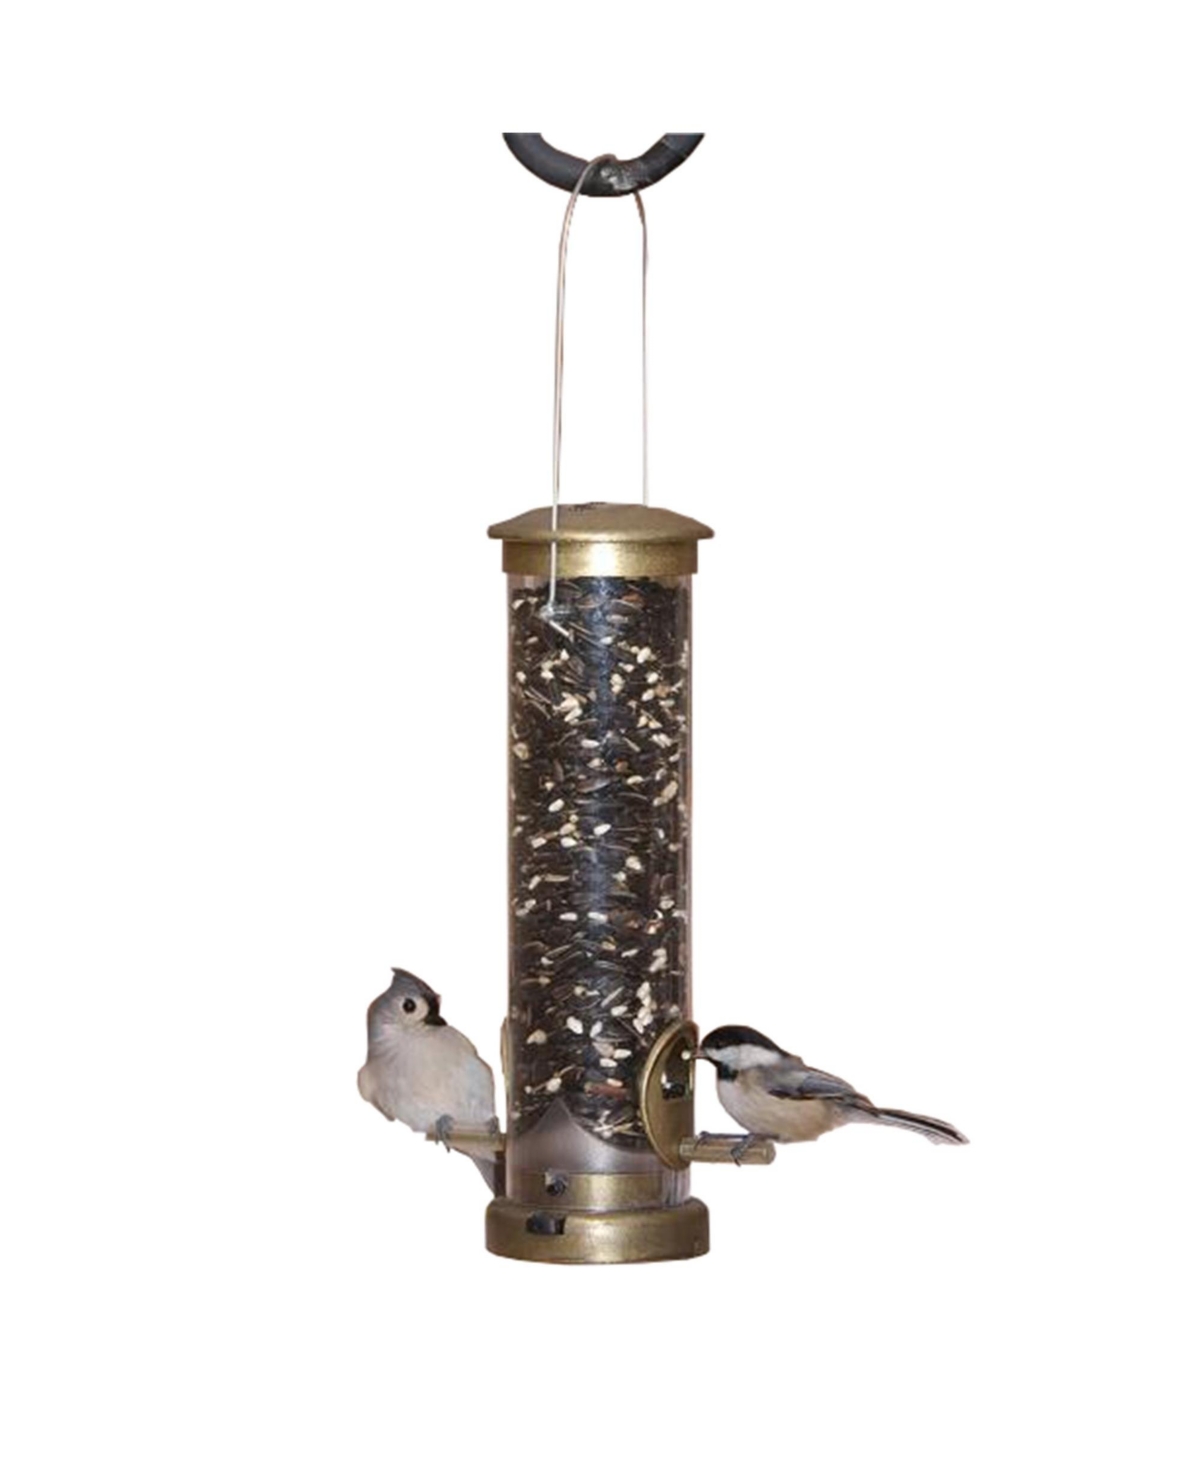 (ASP394) Quick-Clean Seed Tube Feeder, Small, Antique Brass - Multi